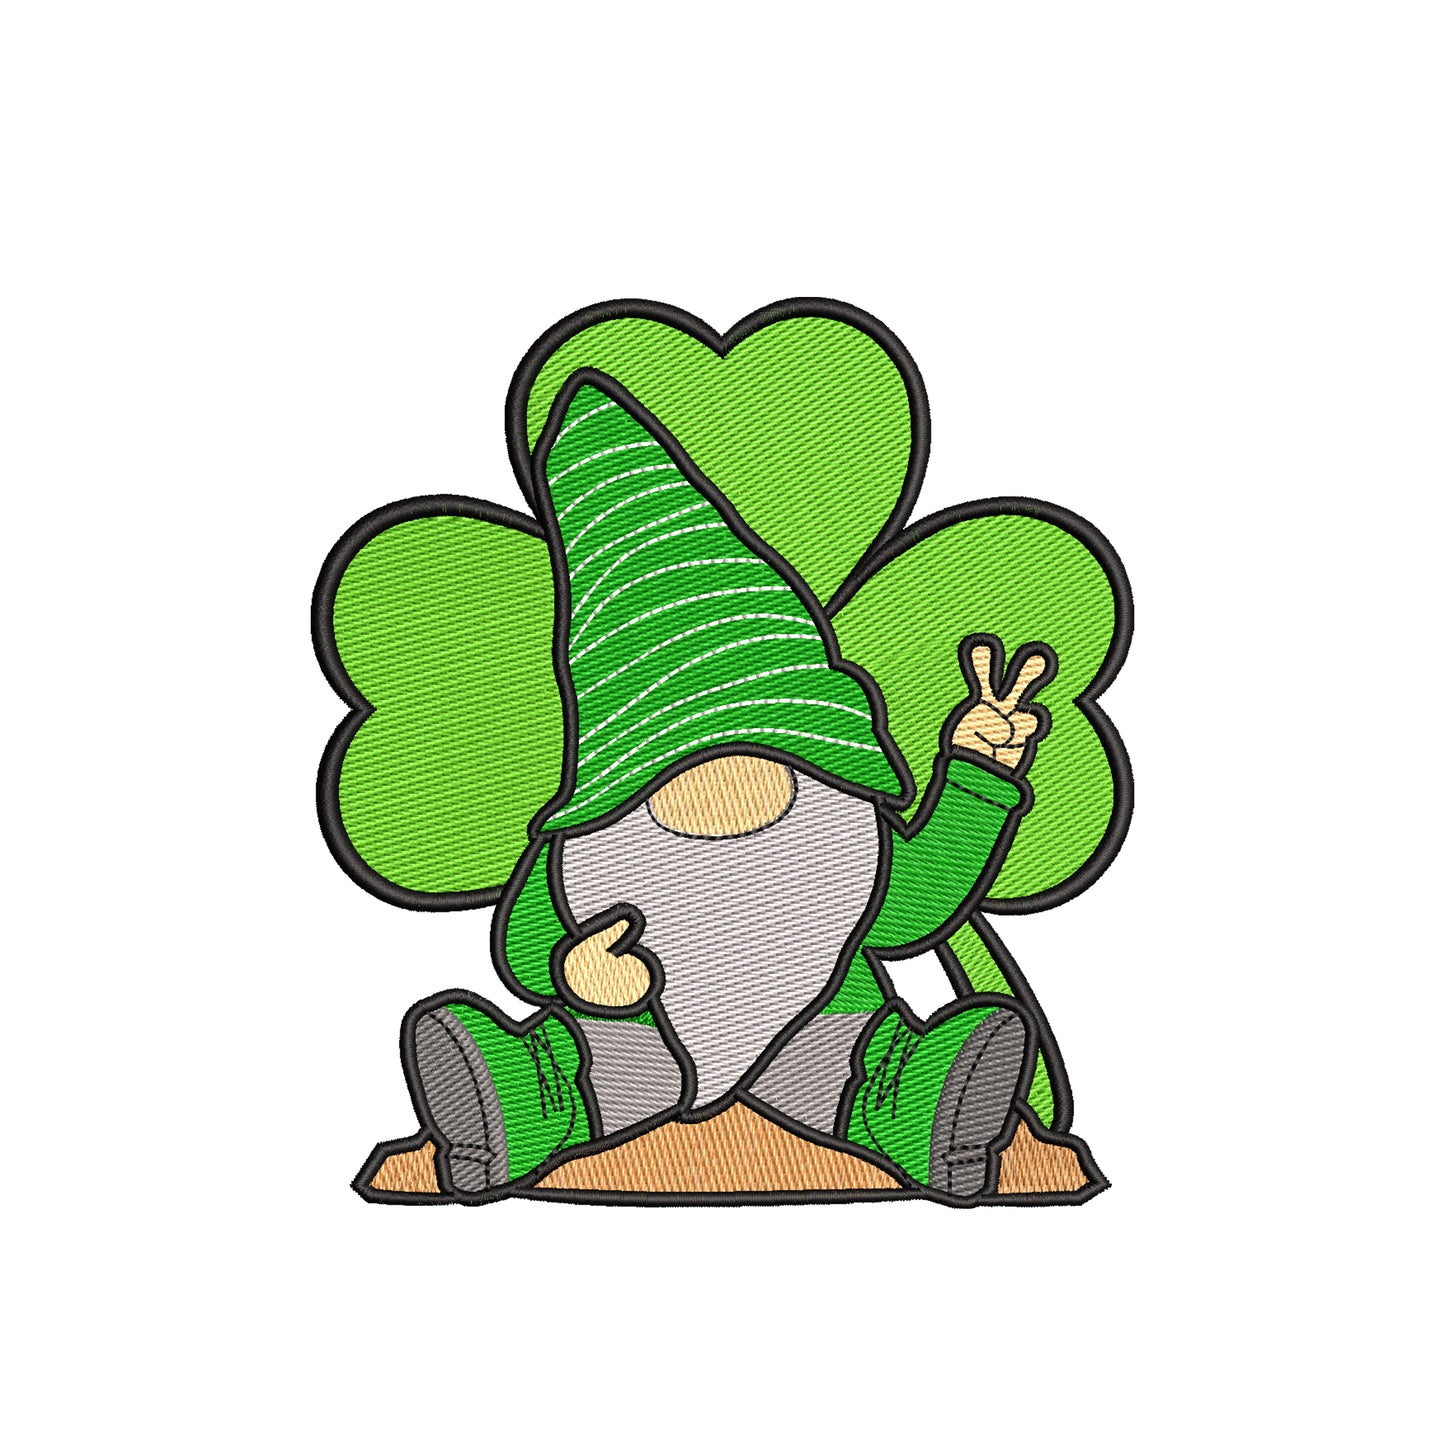 Gnome St. Patrick embroidery designs clever - 980009